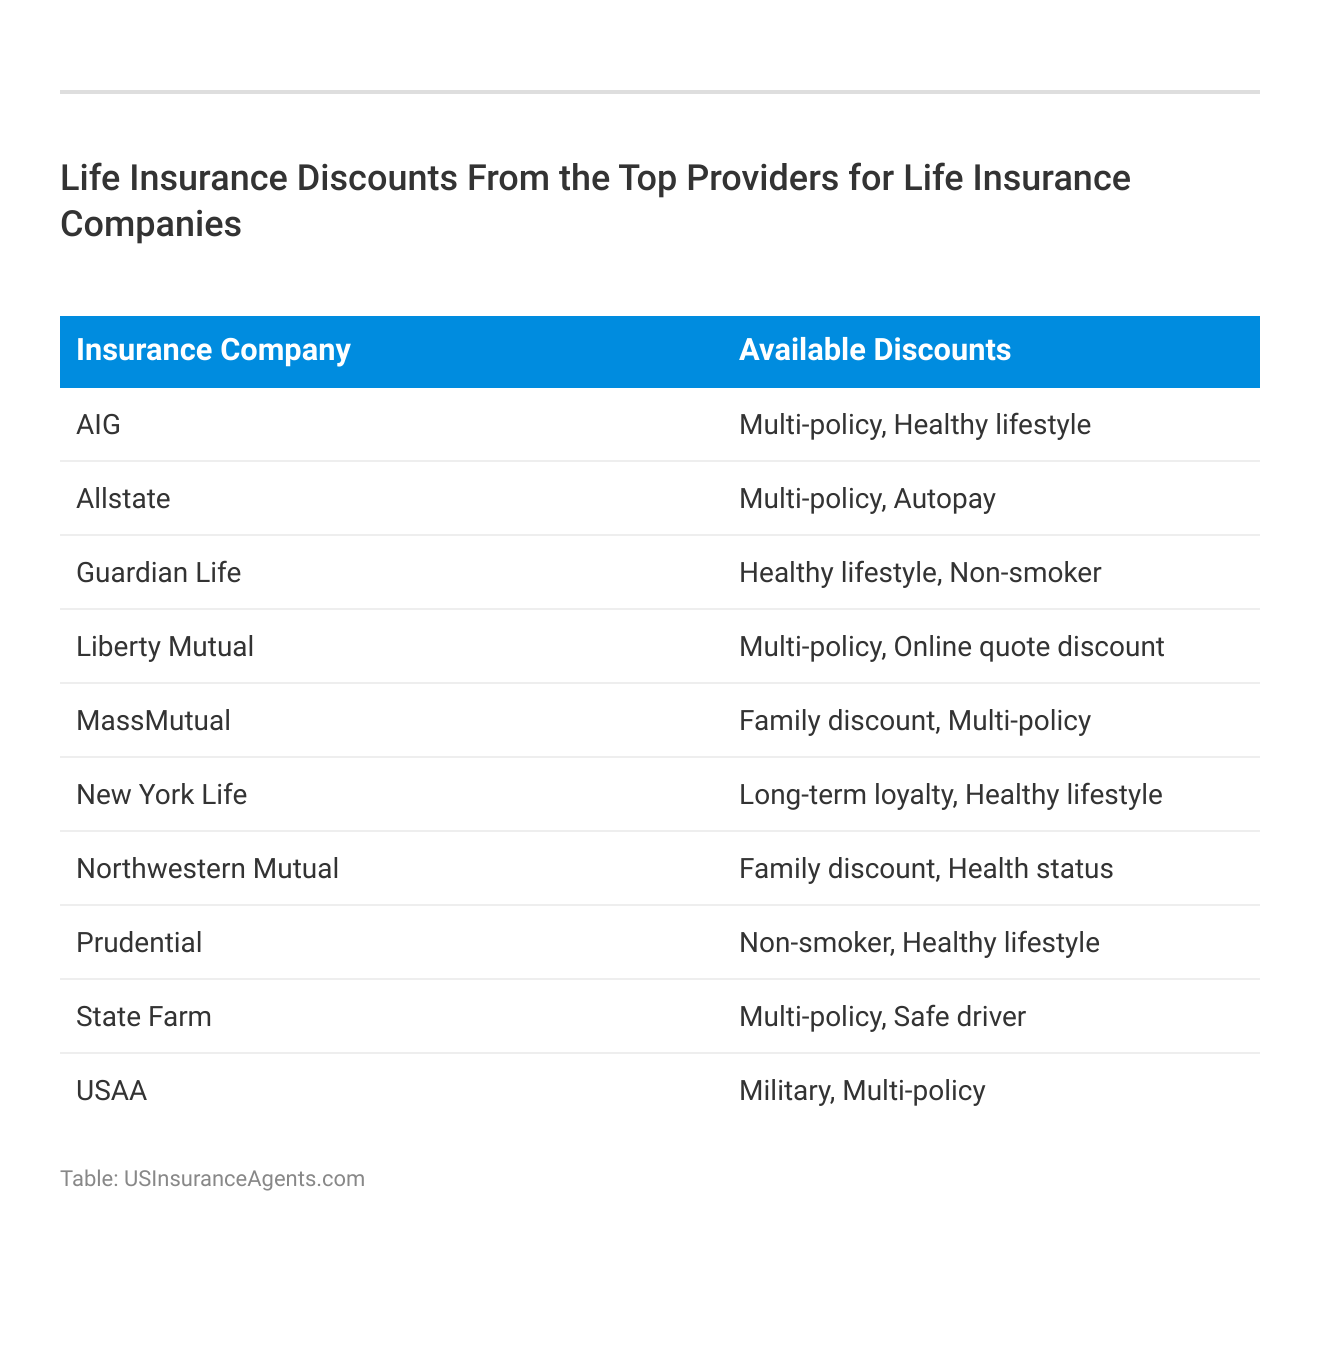 <h3>Life Insurance Discounts From the Top Providers for Life Insurance Companies</h3>